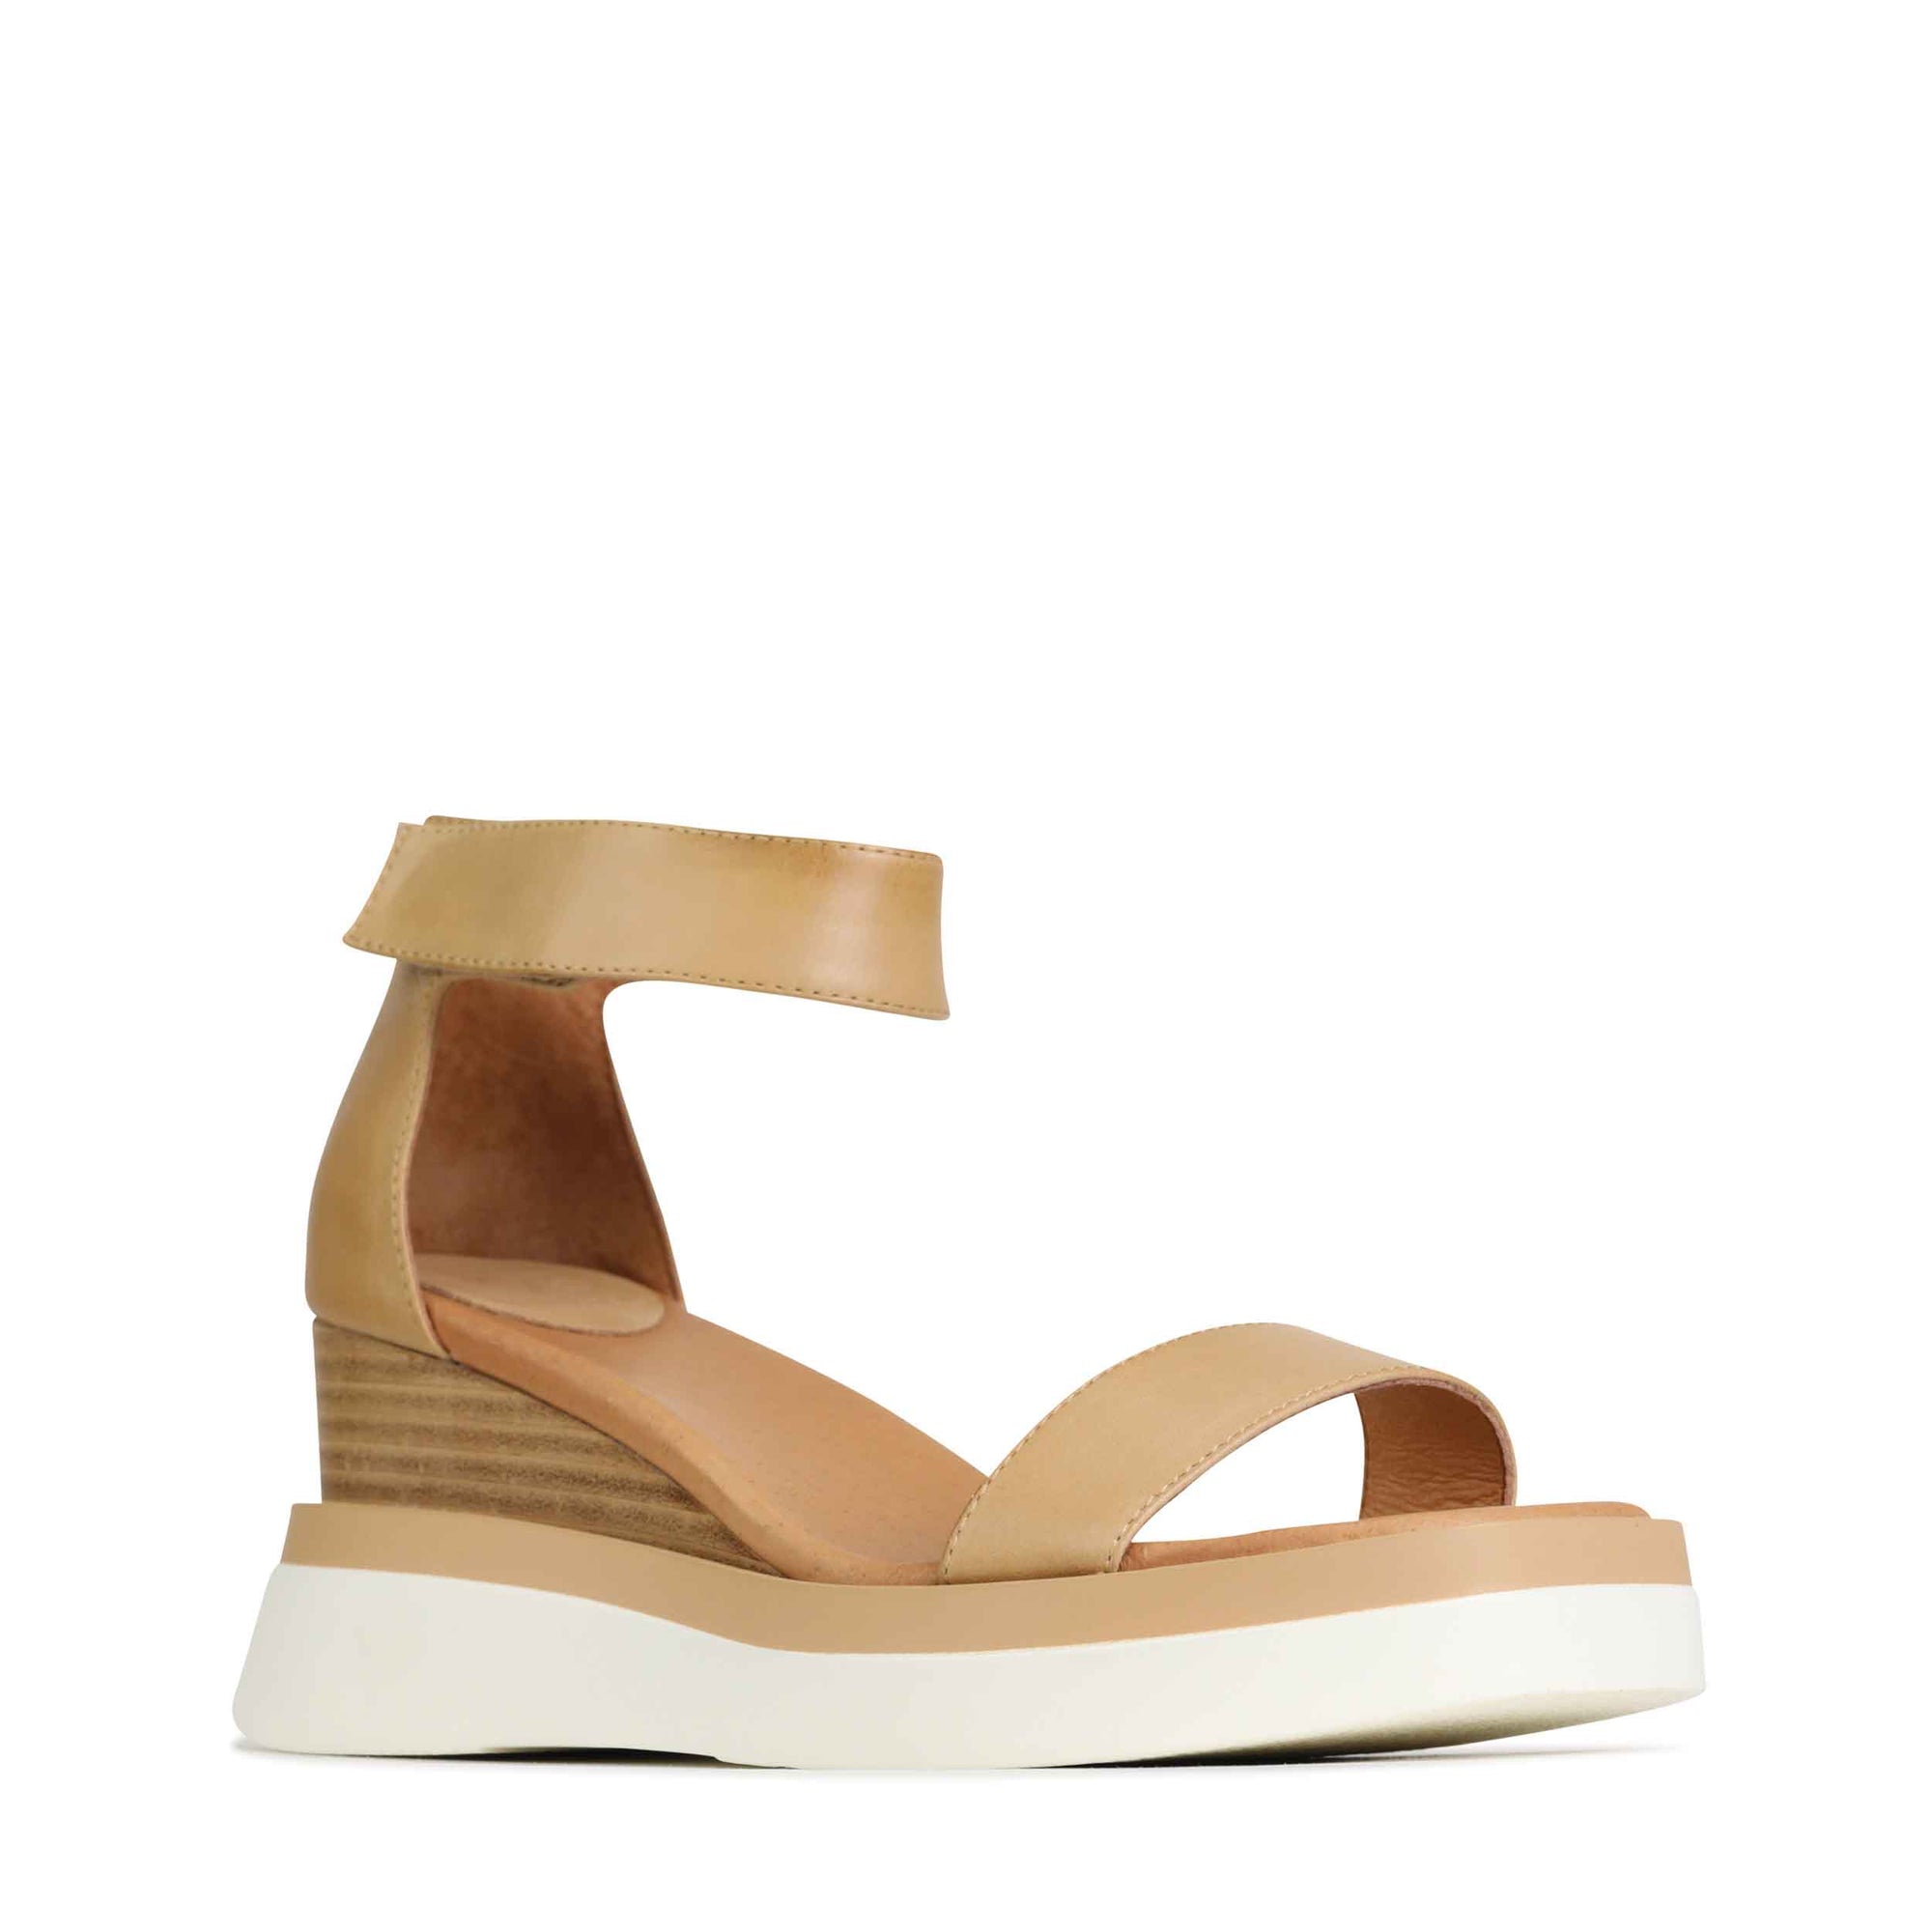 Parallel Culture Shoes and Fashion Online WEDGES EOS SASKINA WEDGE TAN